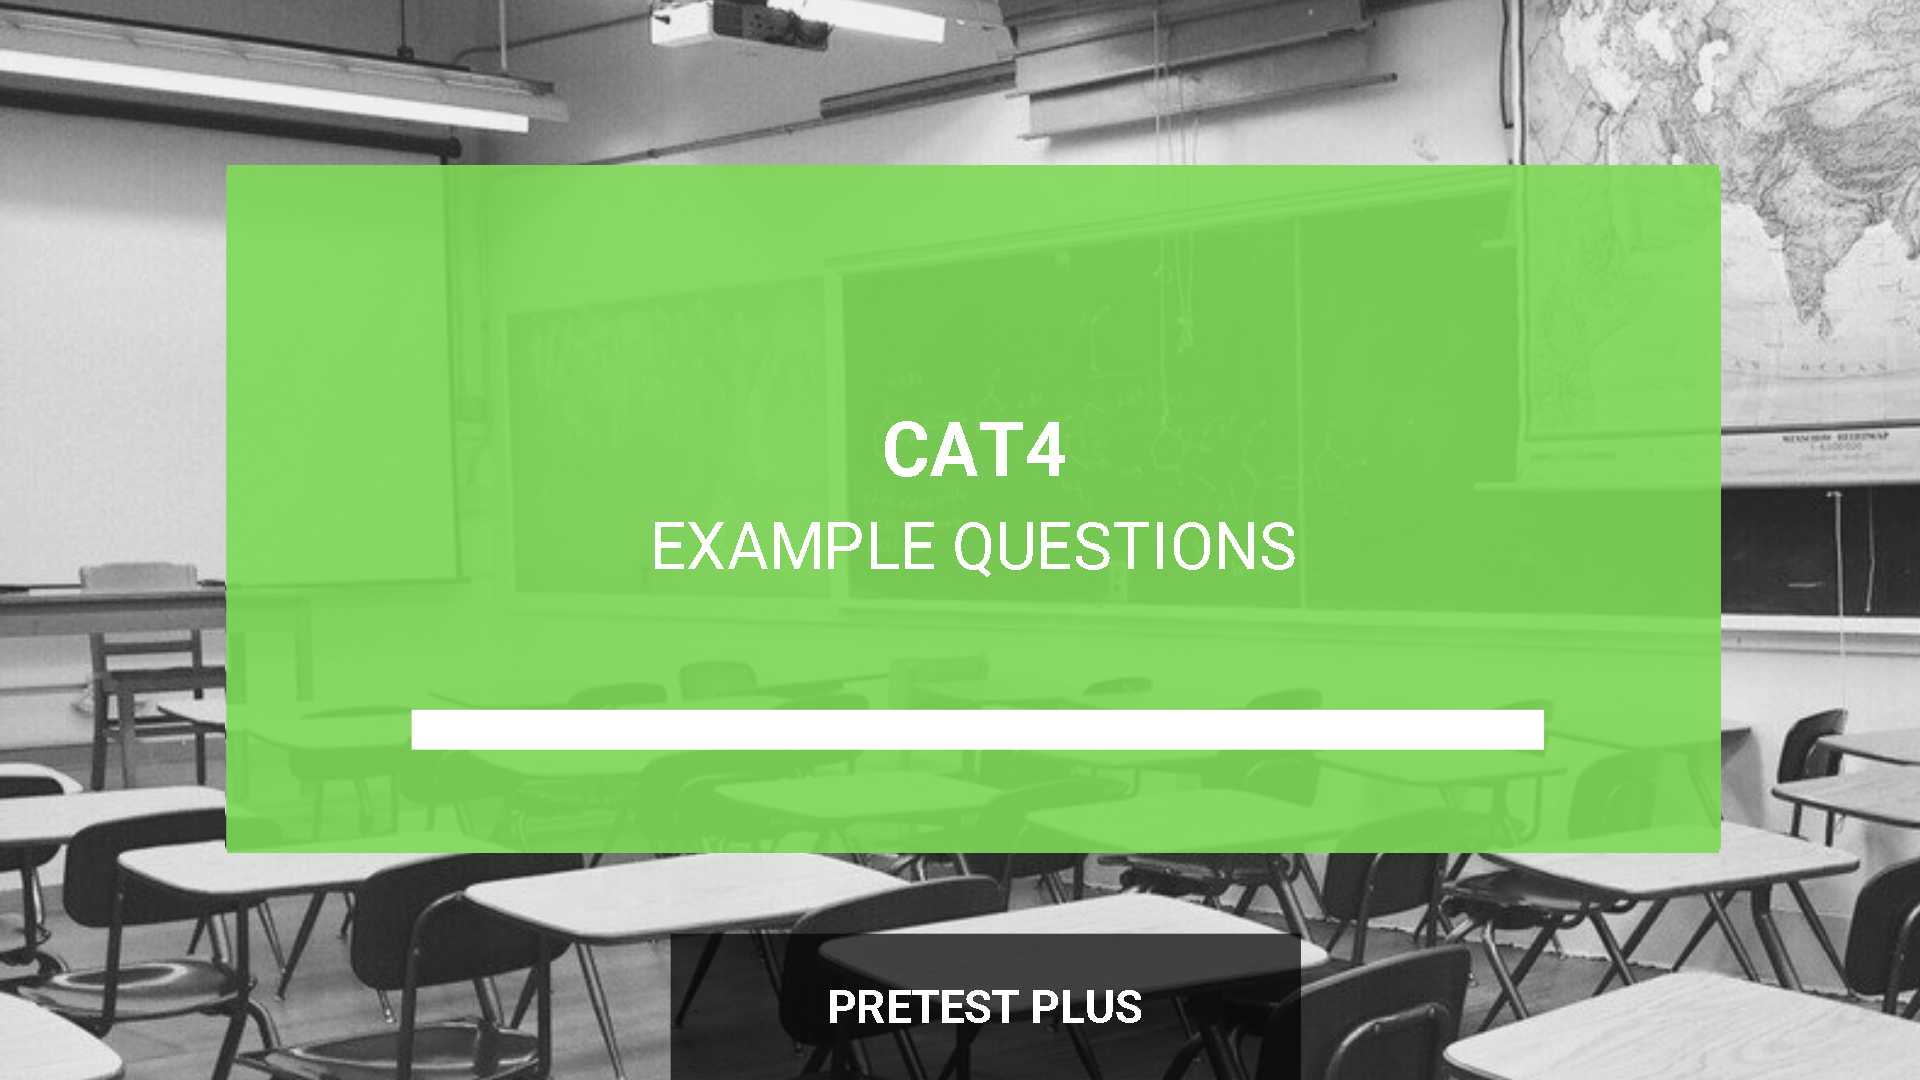 Developing students' problem-solving abilities - CATS Cambridge